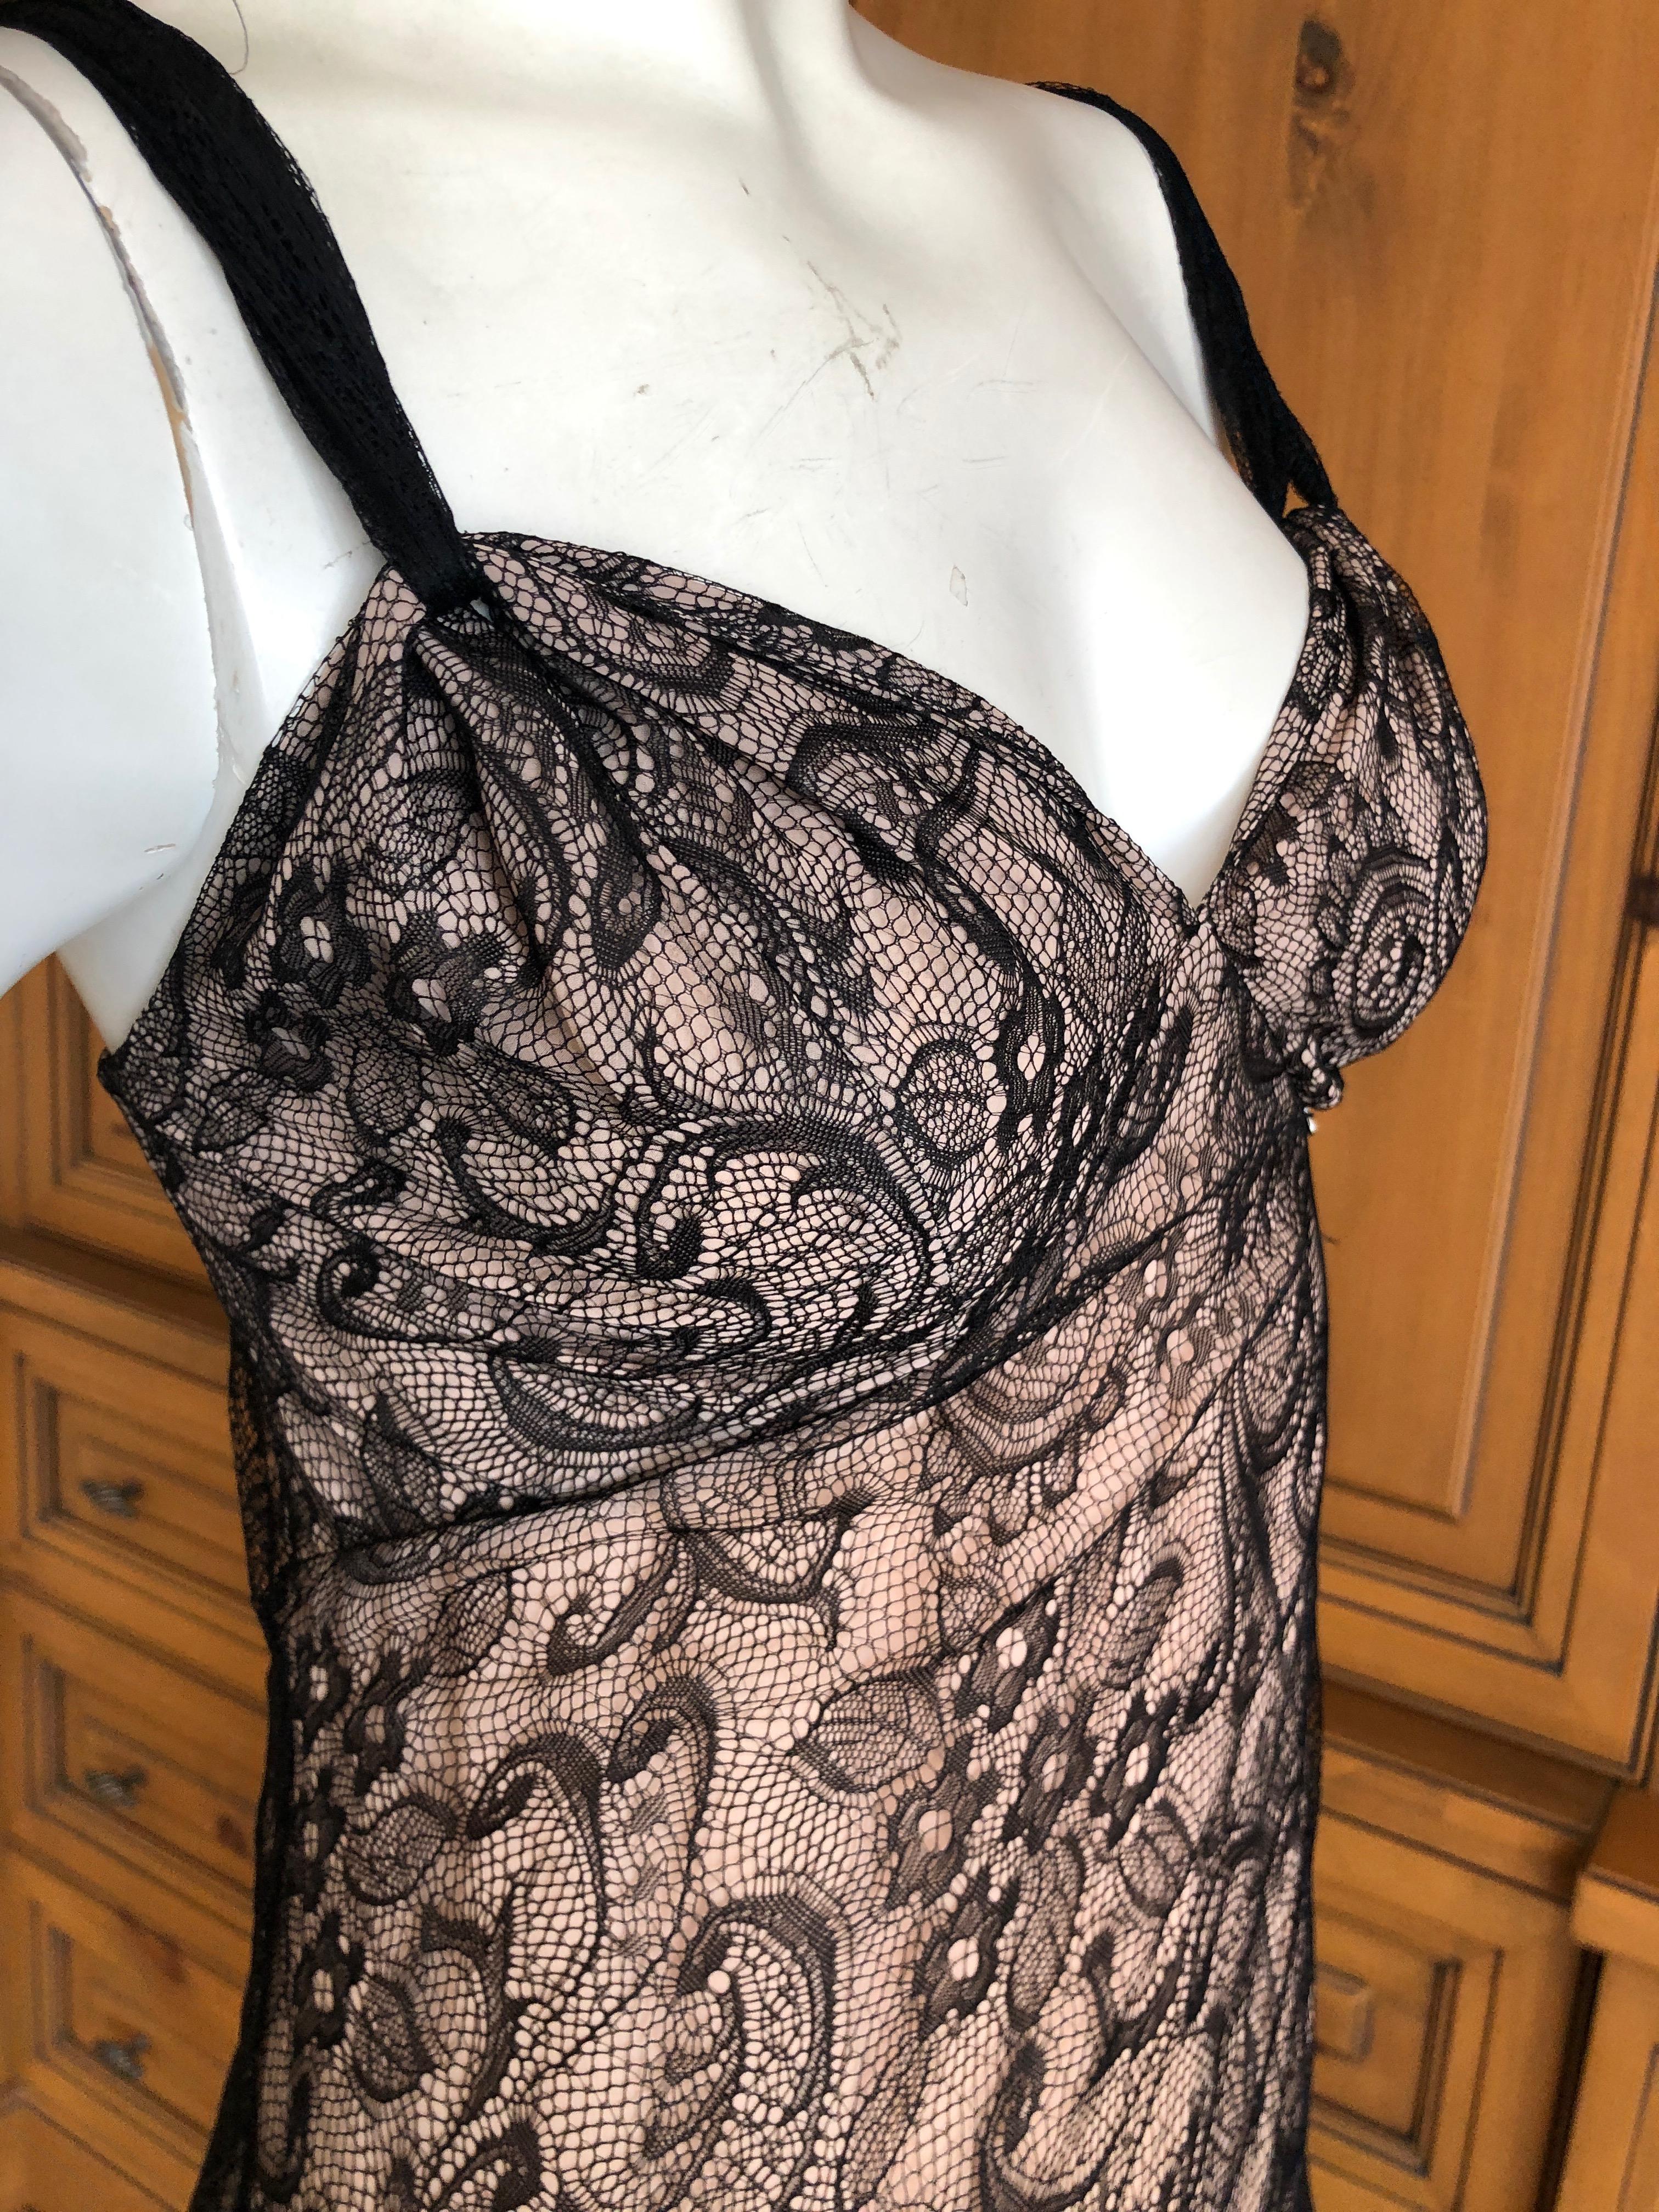 Elegant John Galliano Black Lace Evening Dress with Pale Pink Under Lining.
Size 42
Bust 38